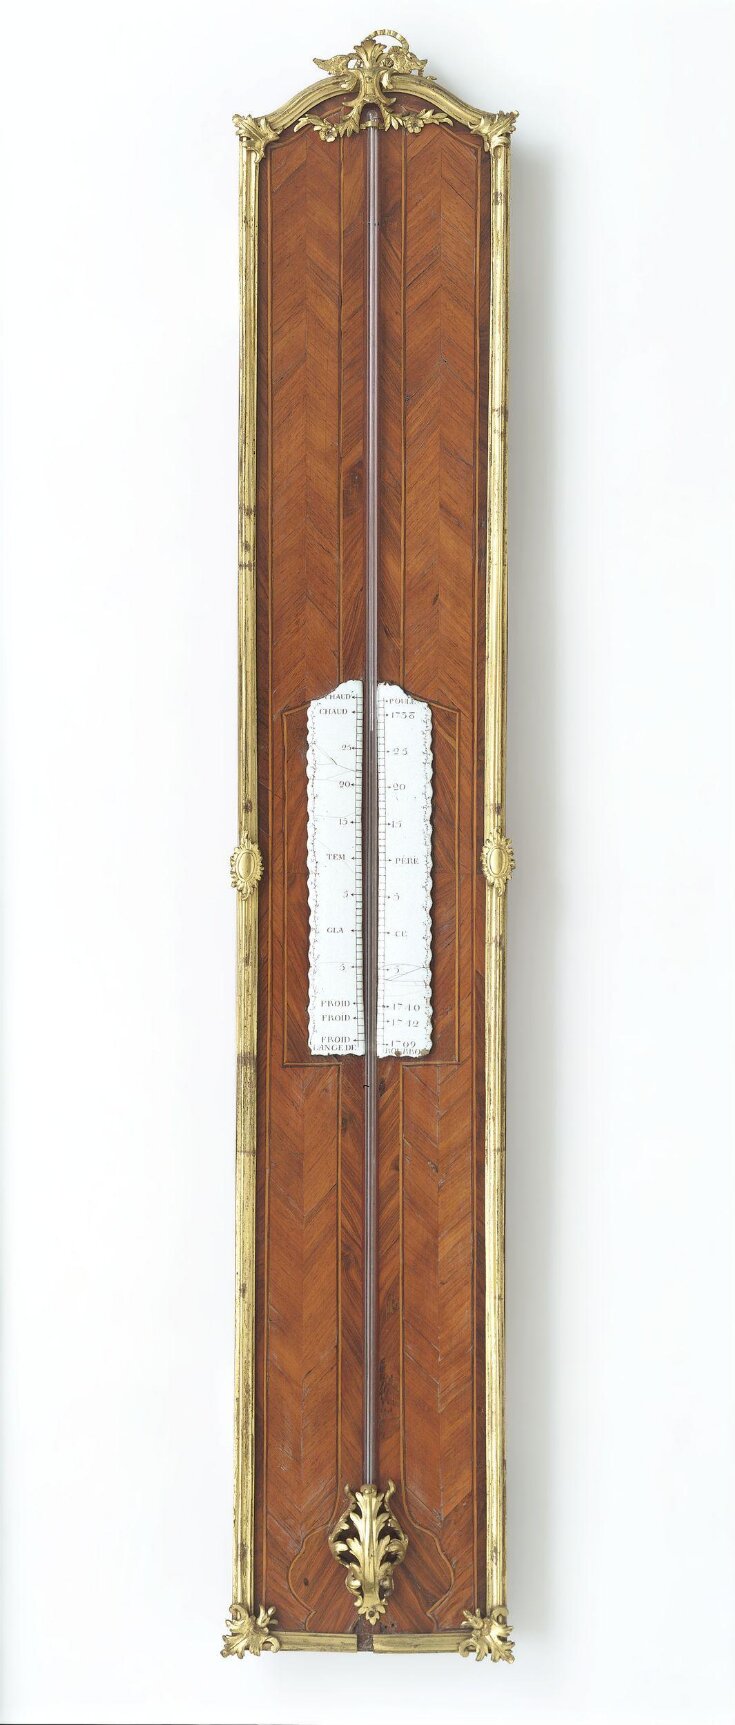 Thermometer top image